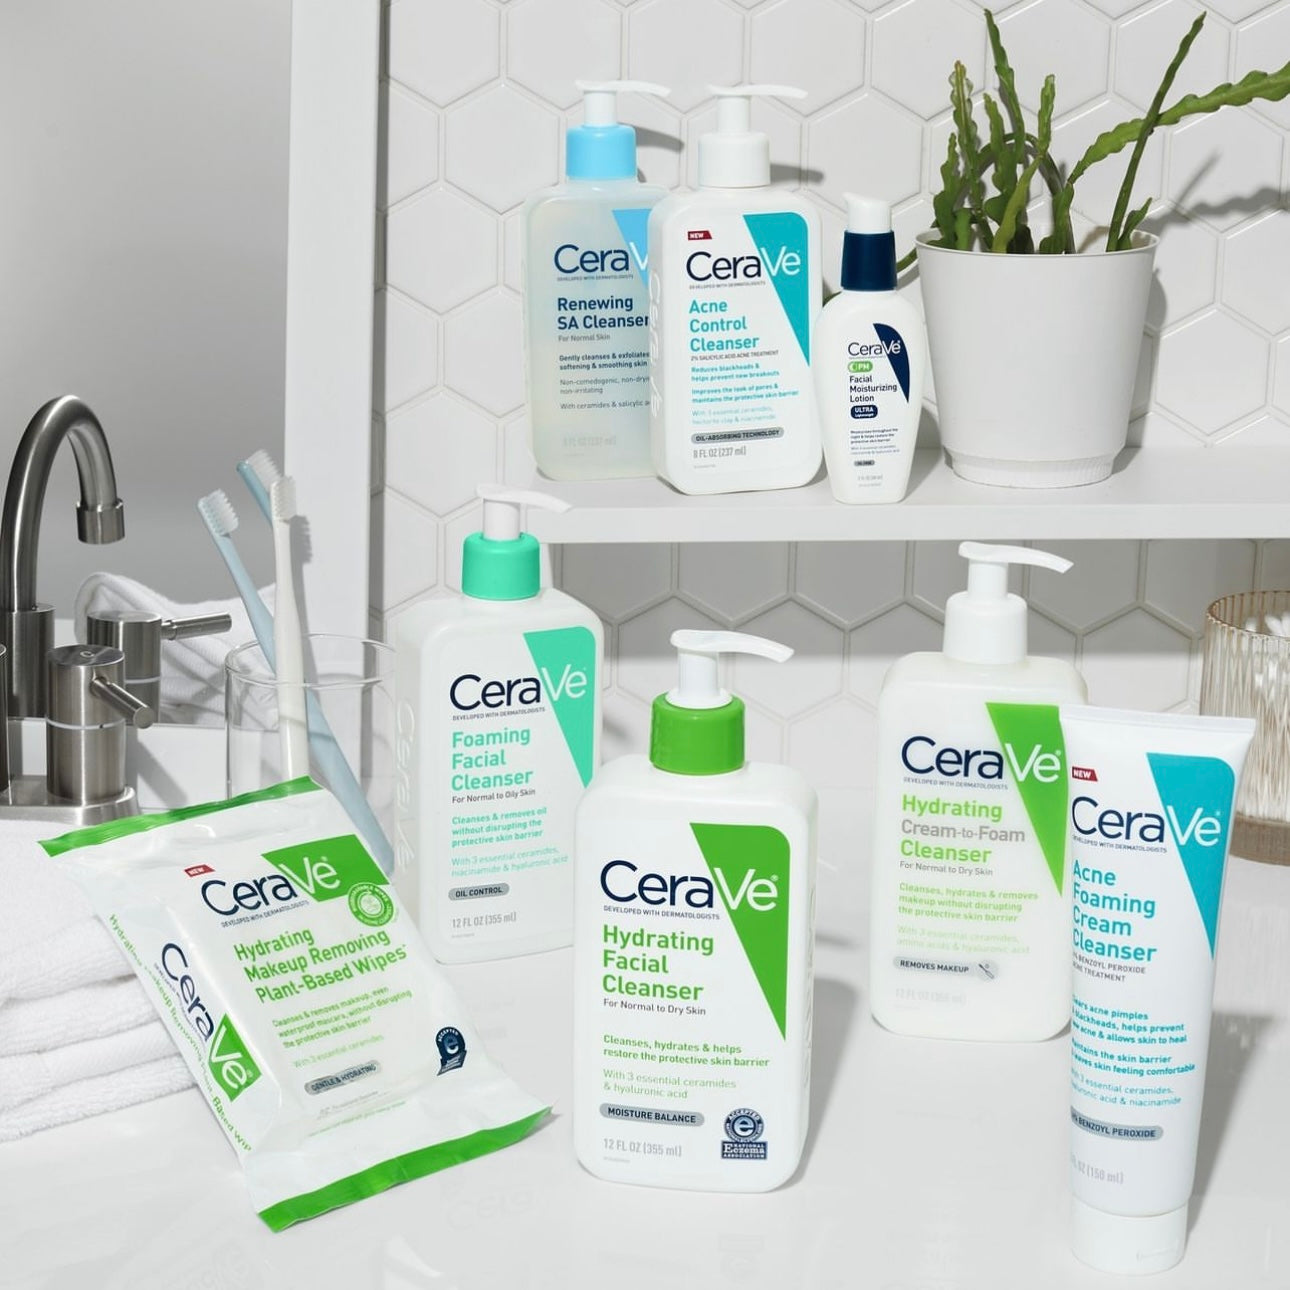 Cerave Skin Care Products